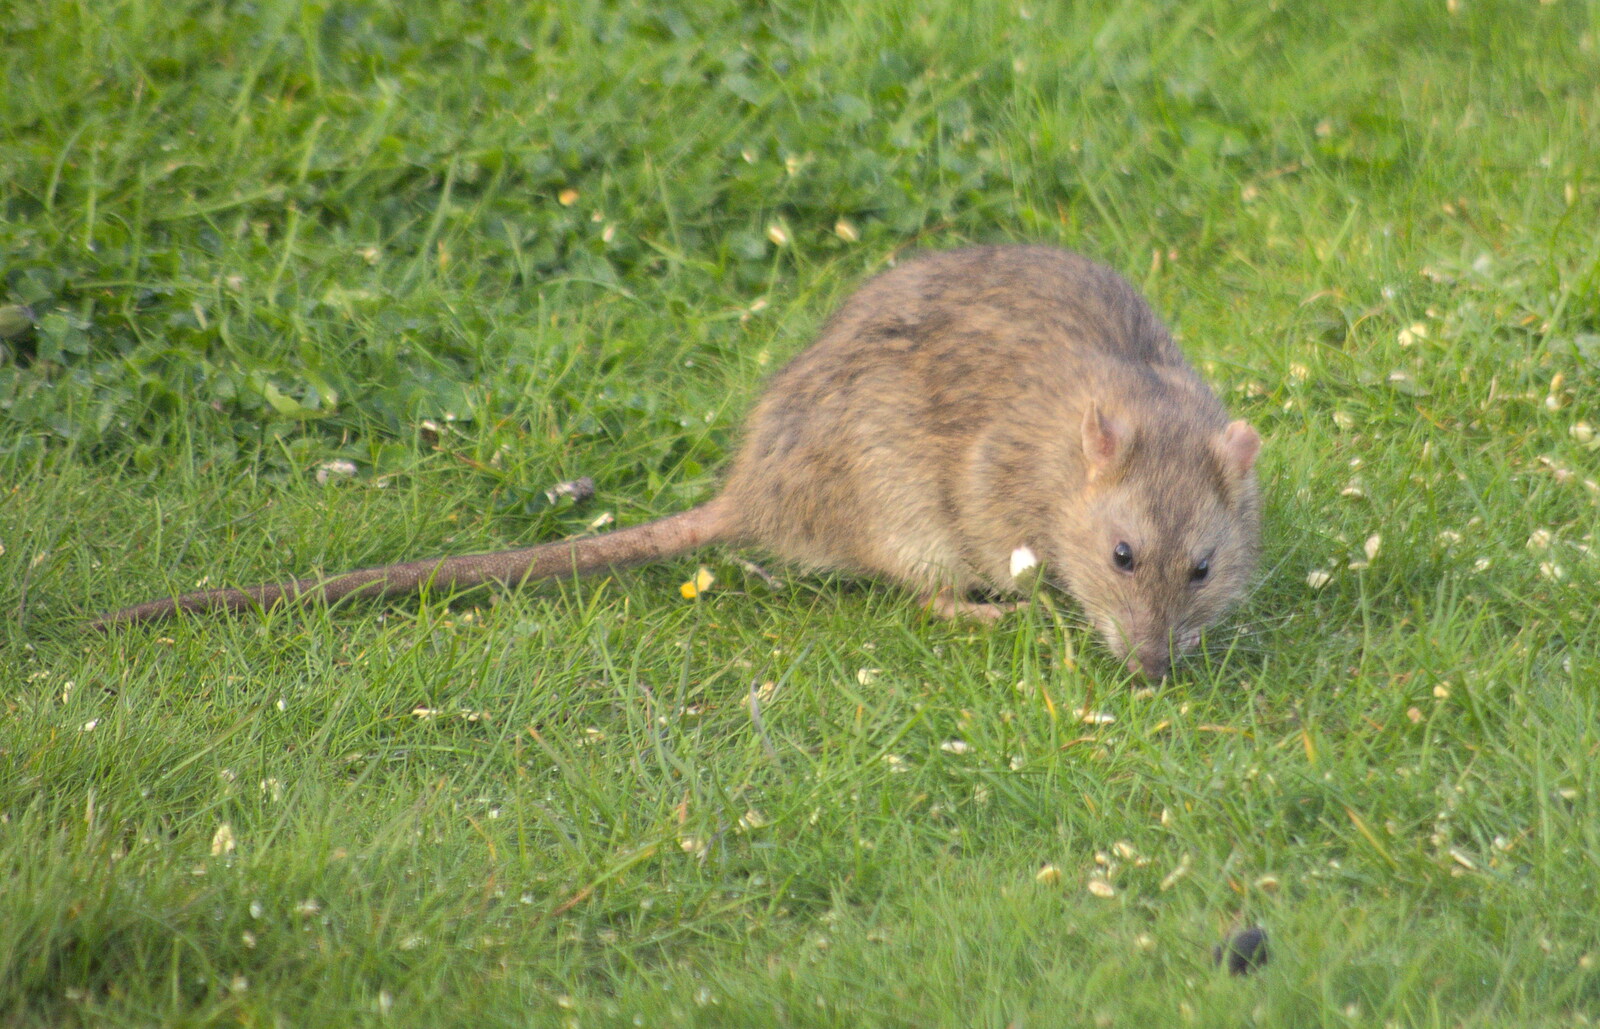 Mother's got rats, thanks to all the bird food from A Barbeque, Grimspound and Pizza, Dartmoor and Exeter, Devon - 15th April 2017